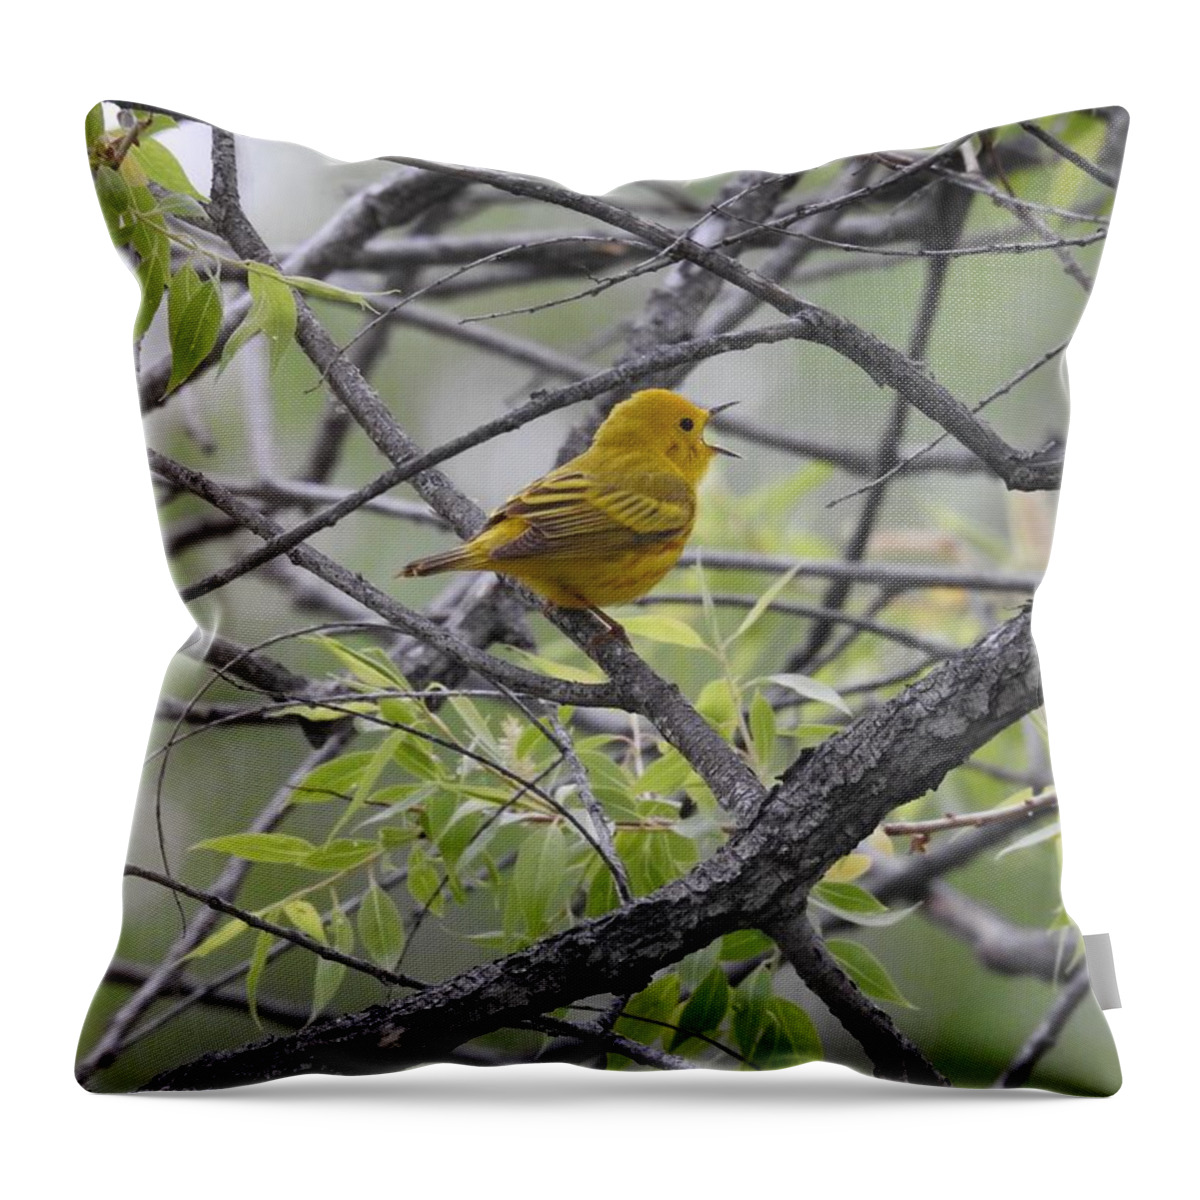 Yellow Throw Pillow featuring the photograph Birdsong by Nicole Belvill